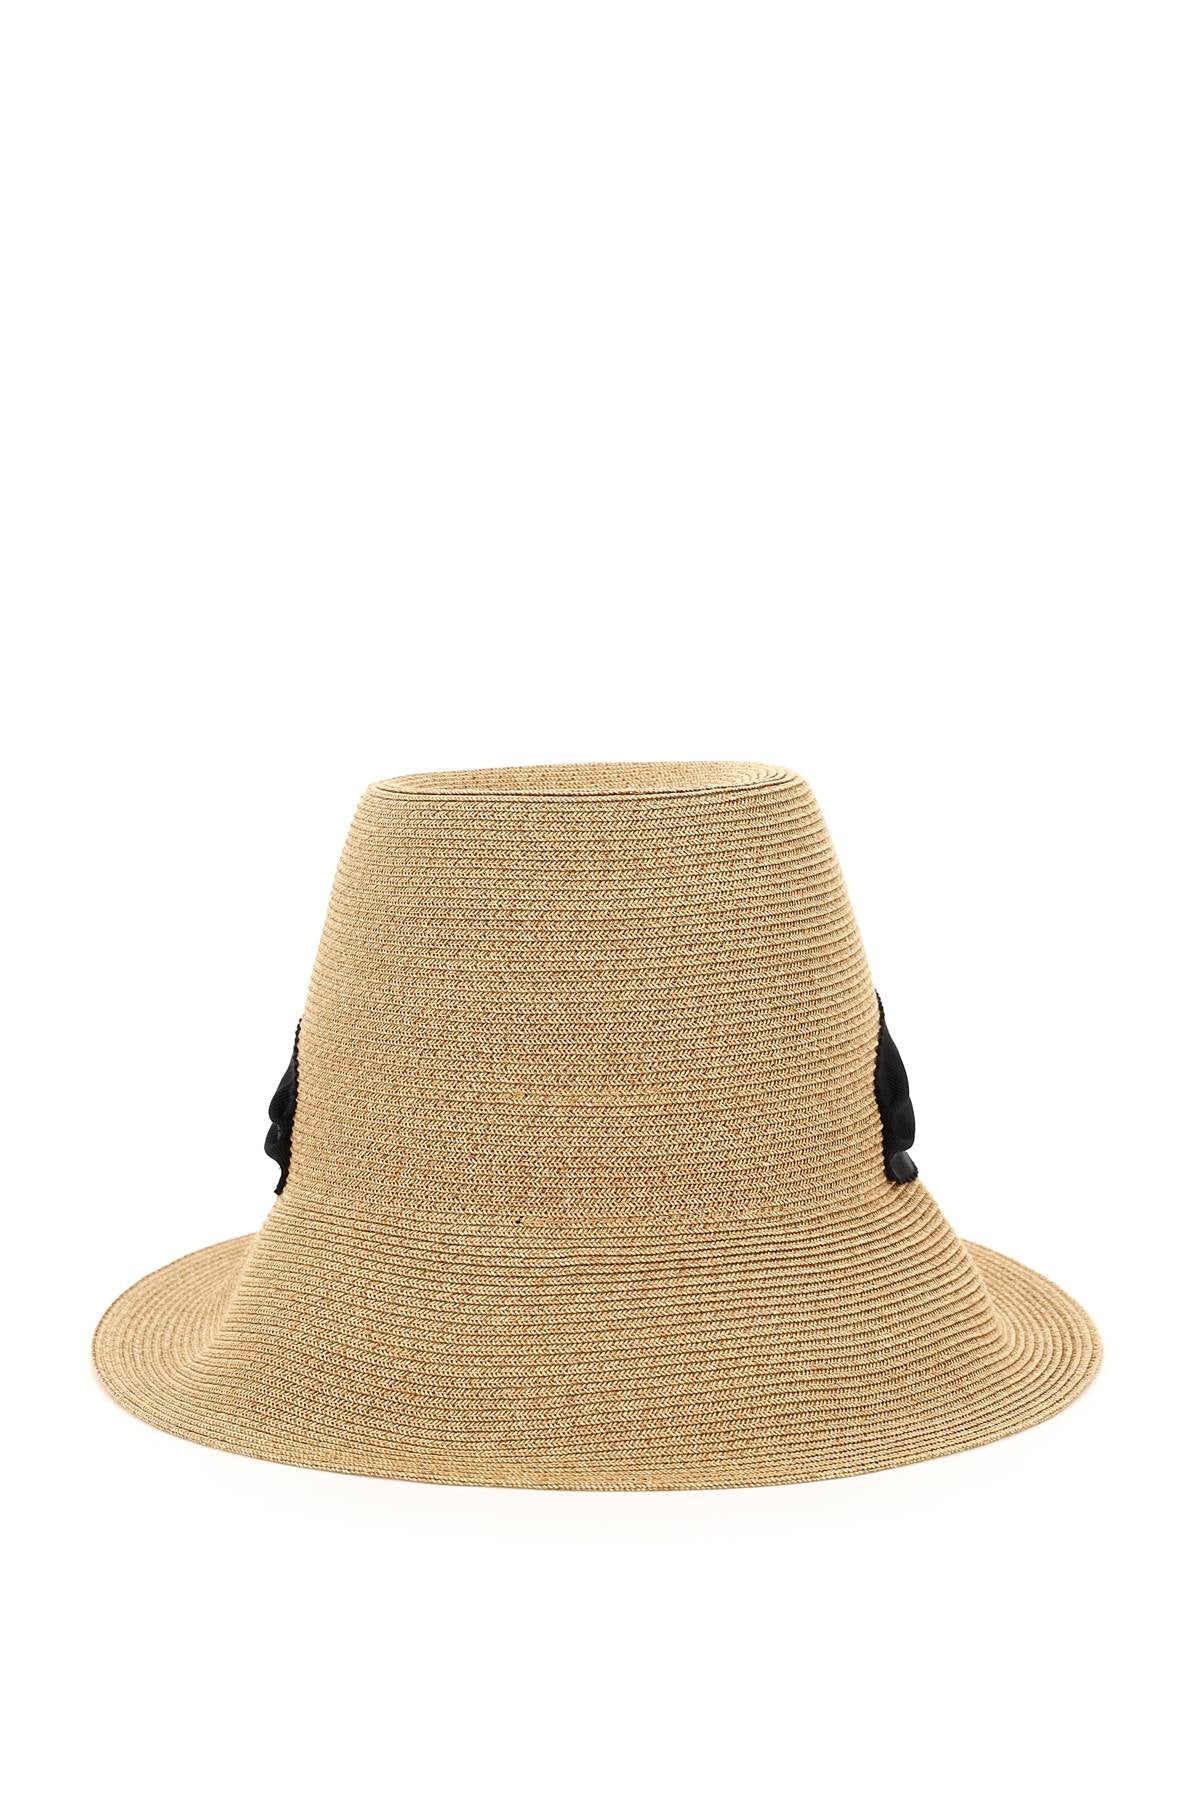 ROGER VIVIER Woven Straw Hat with Crystal Broche Buckle